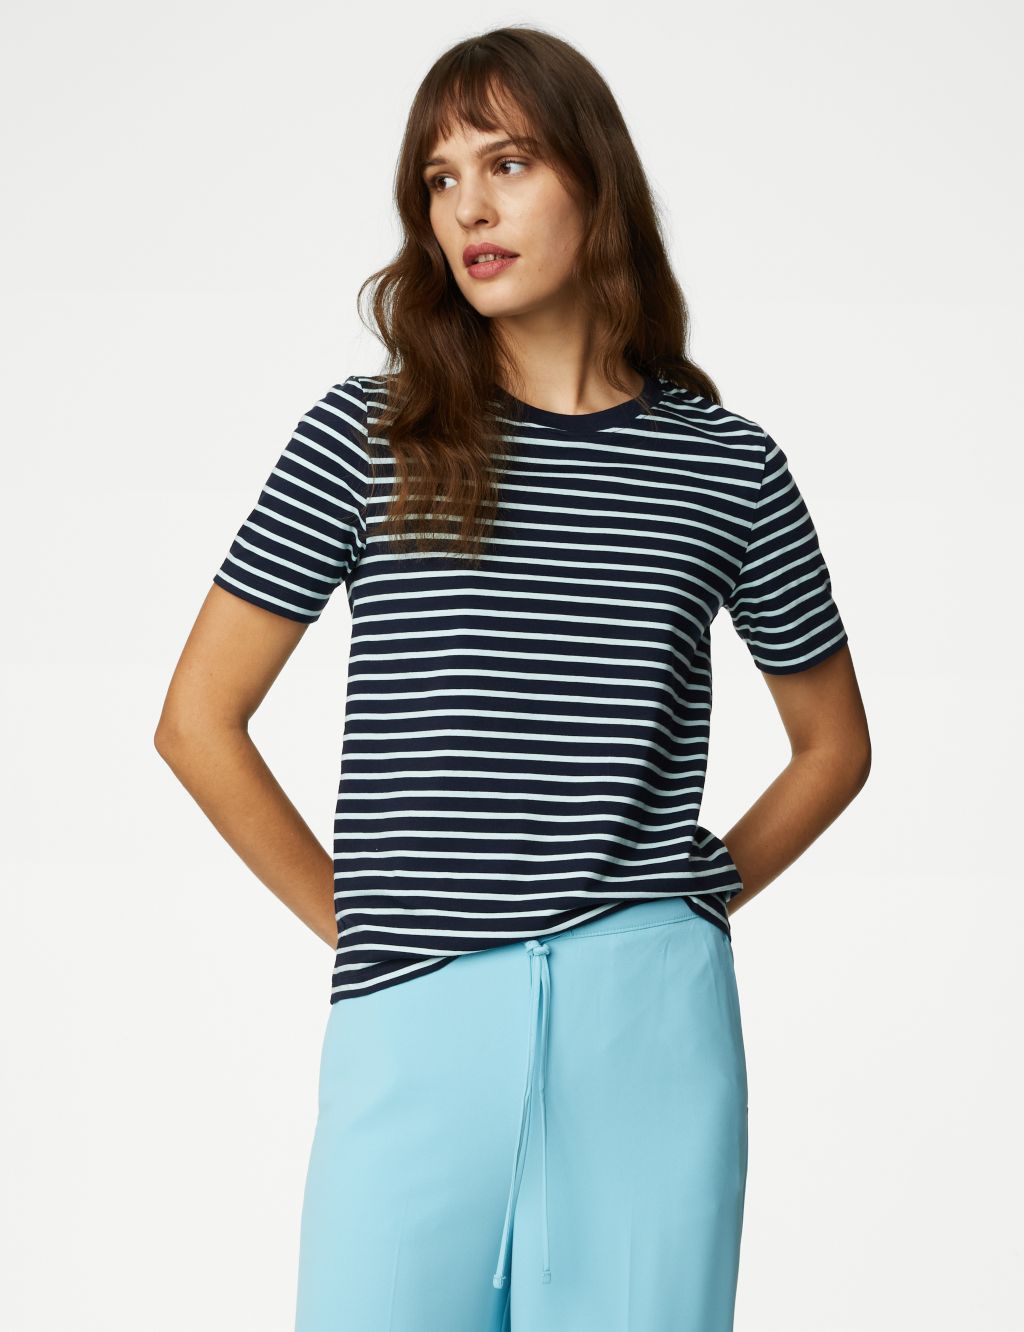 Pure Cotton Striped Everyday Fit T-Shirt image 1